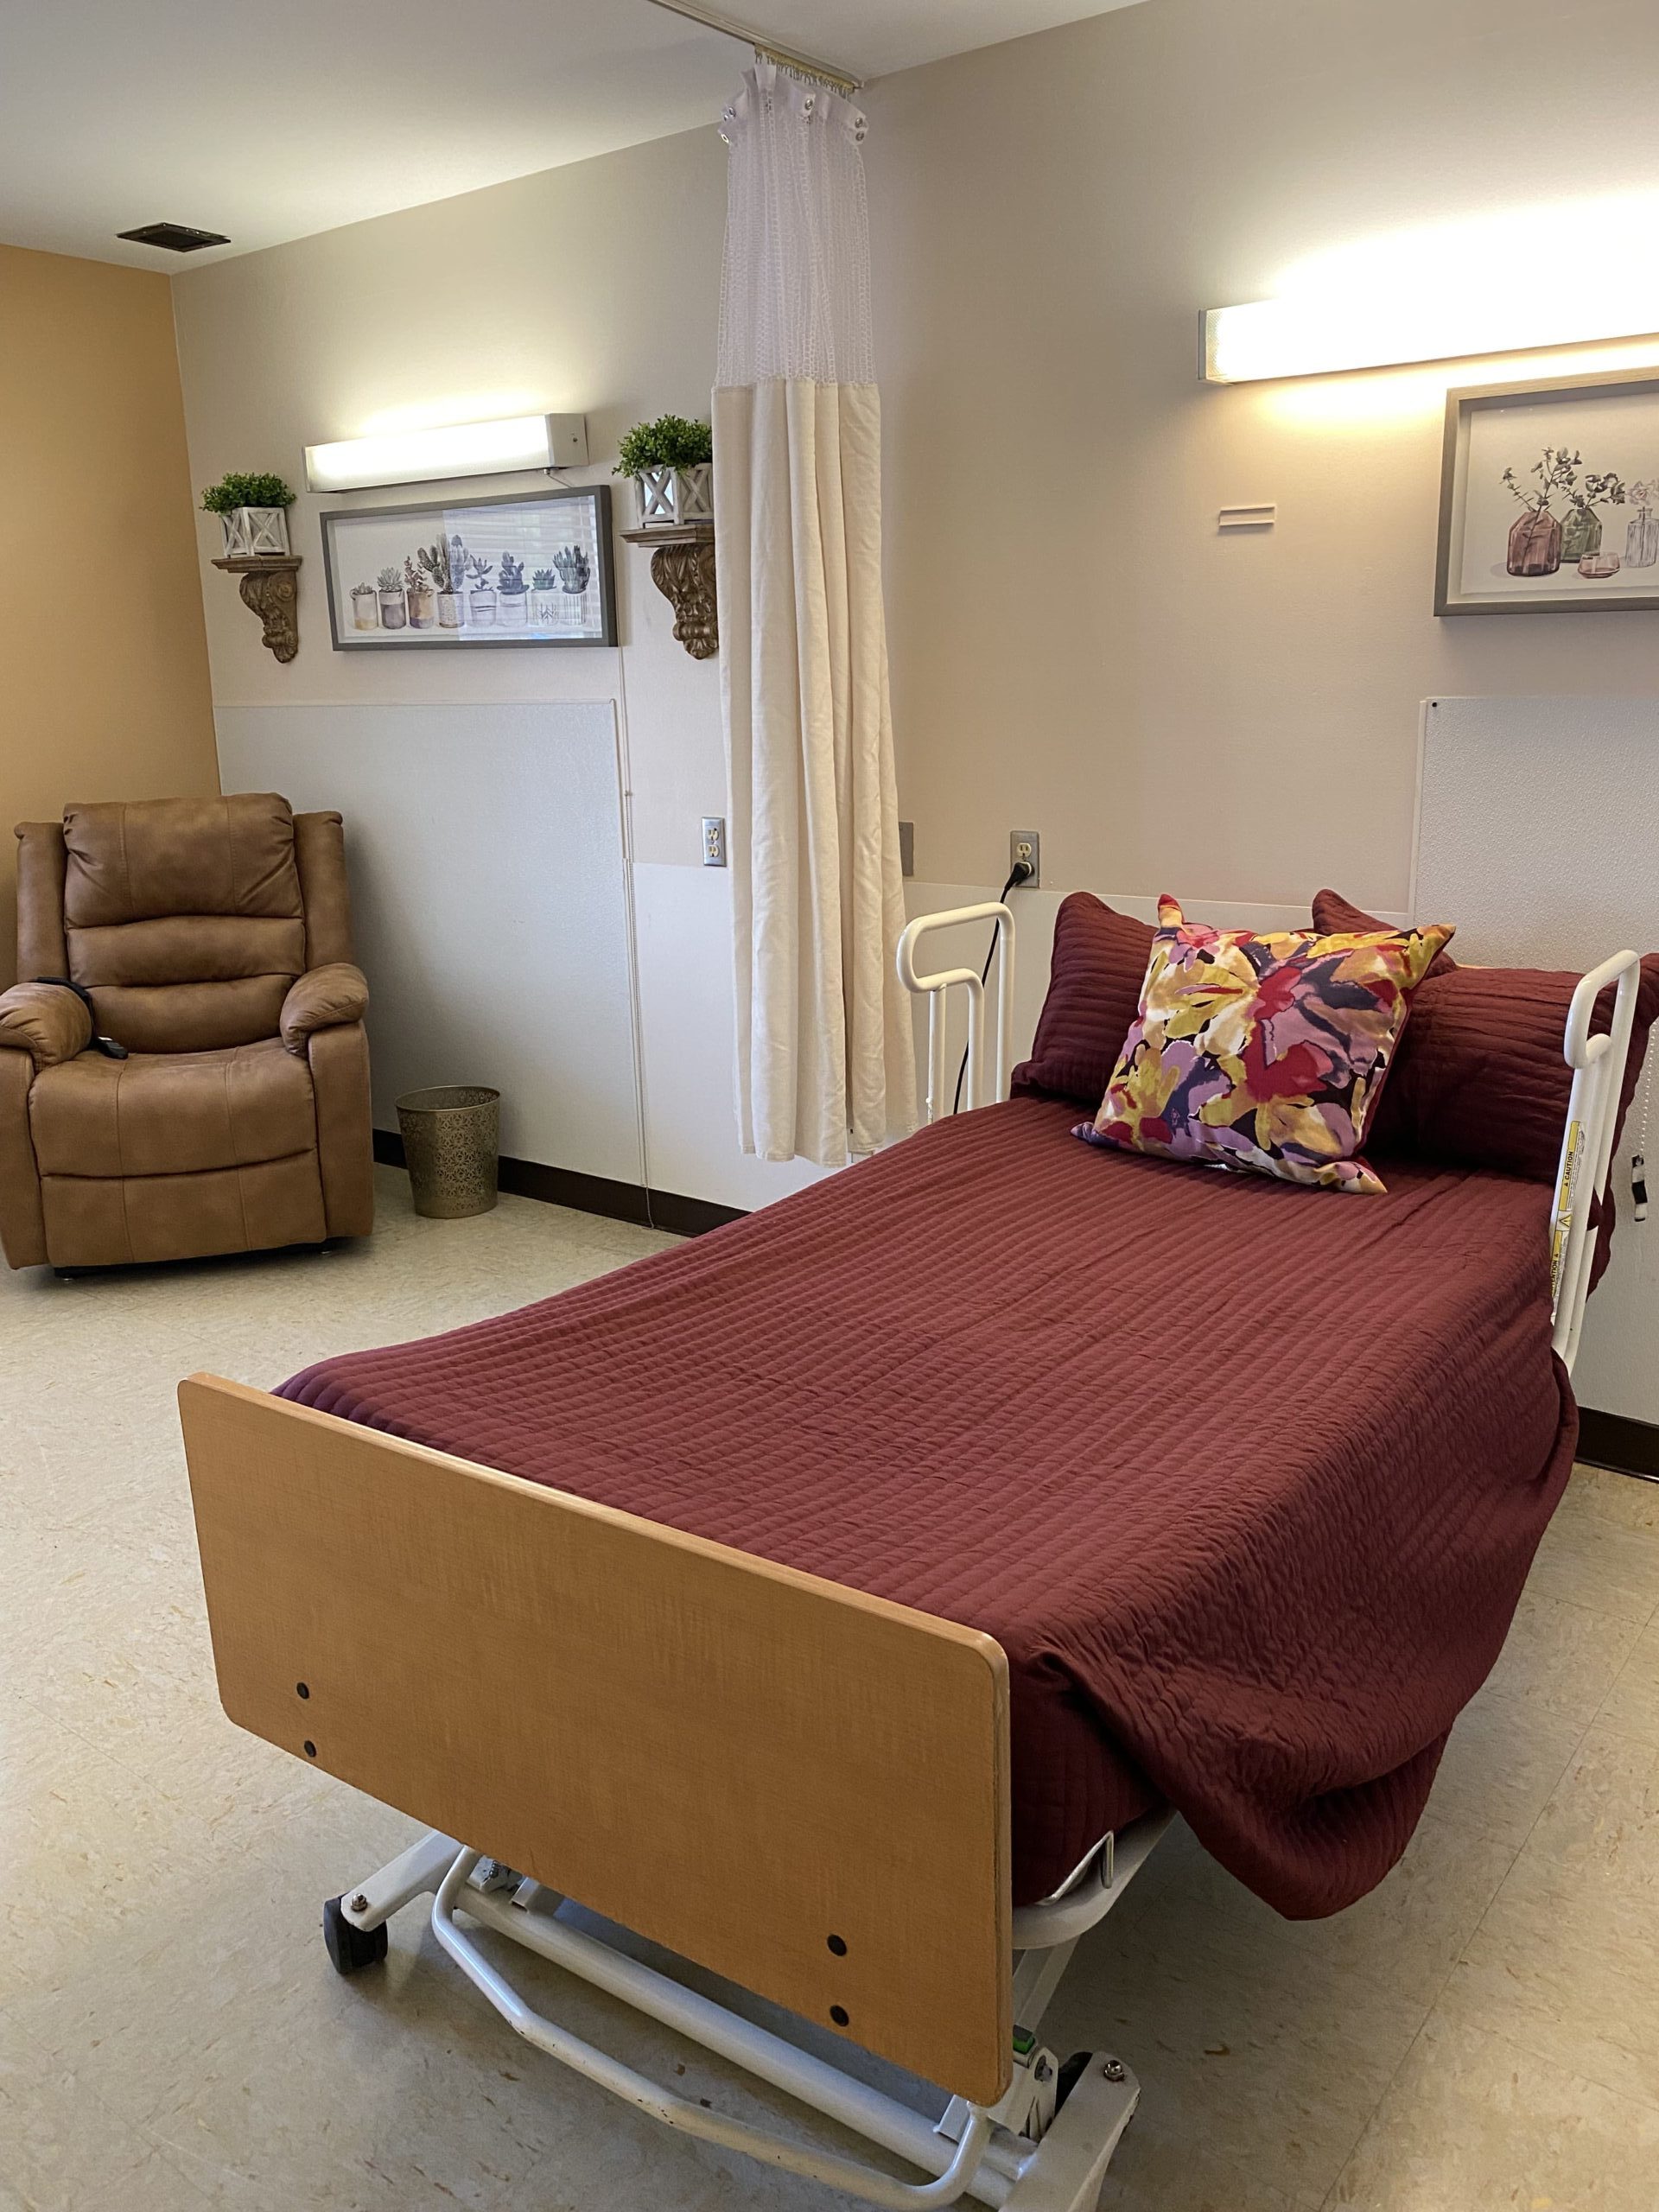 Brickyard Healthcare Fountainview Care Center resident bedroom suite